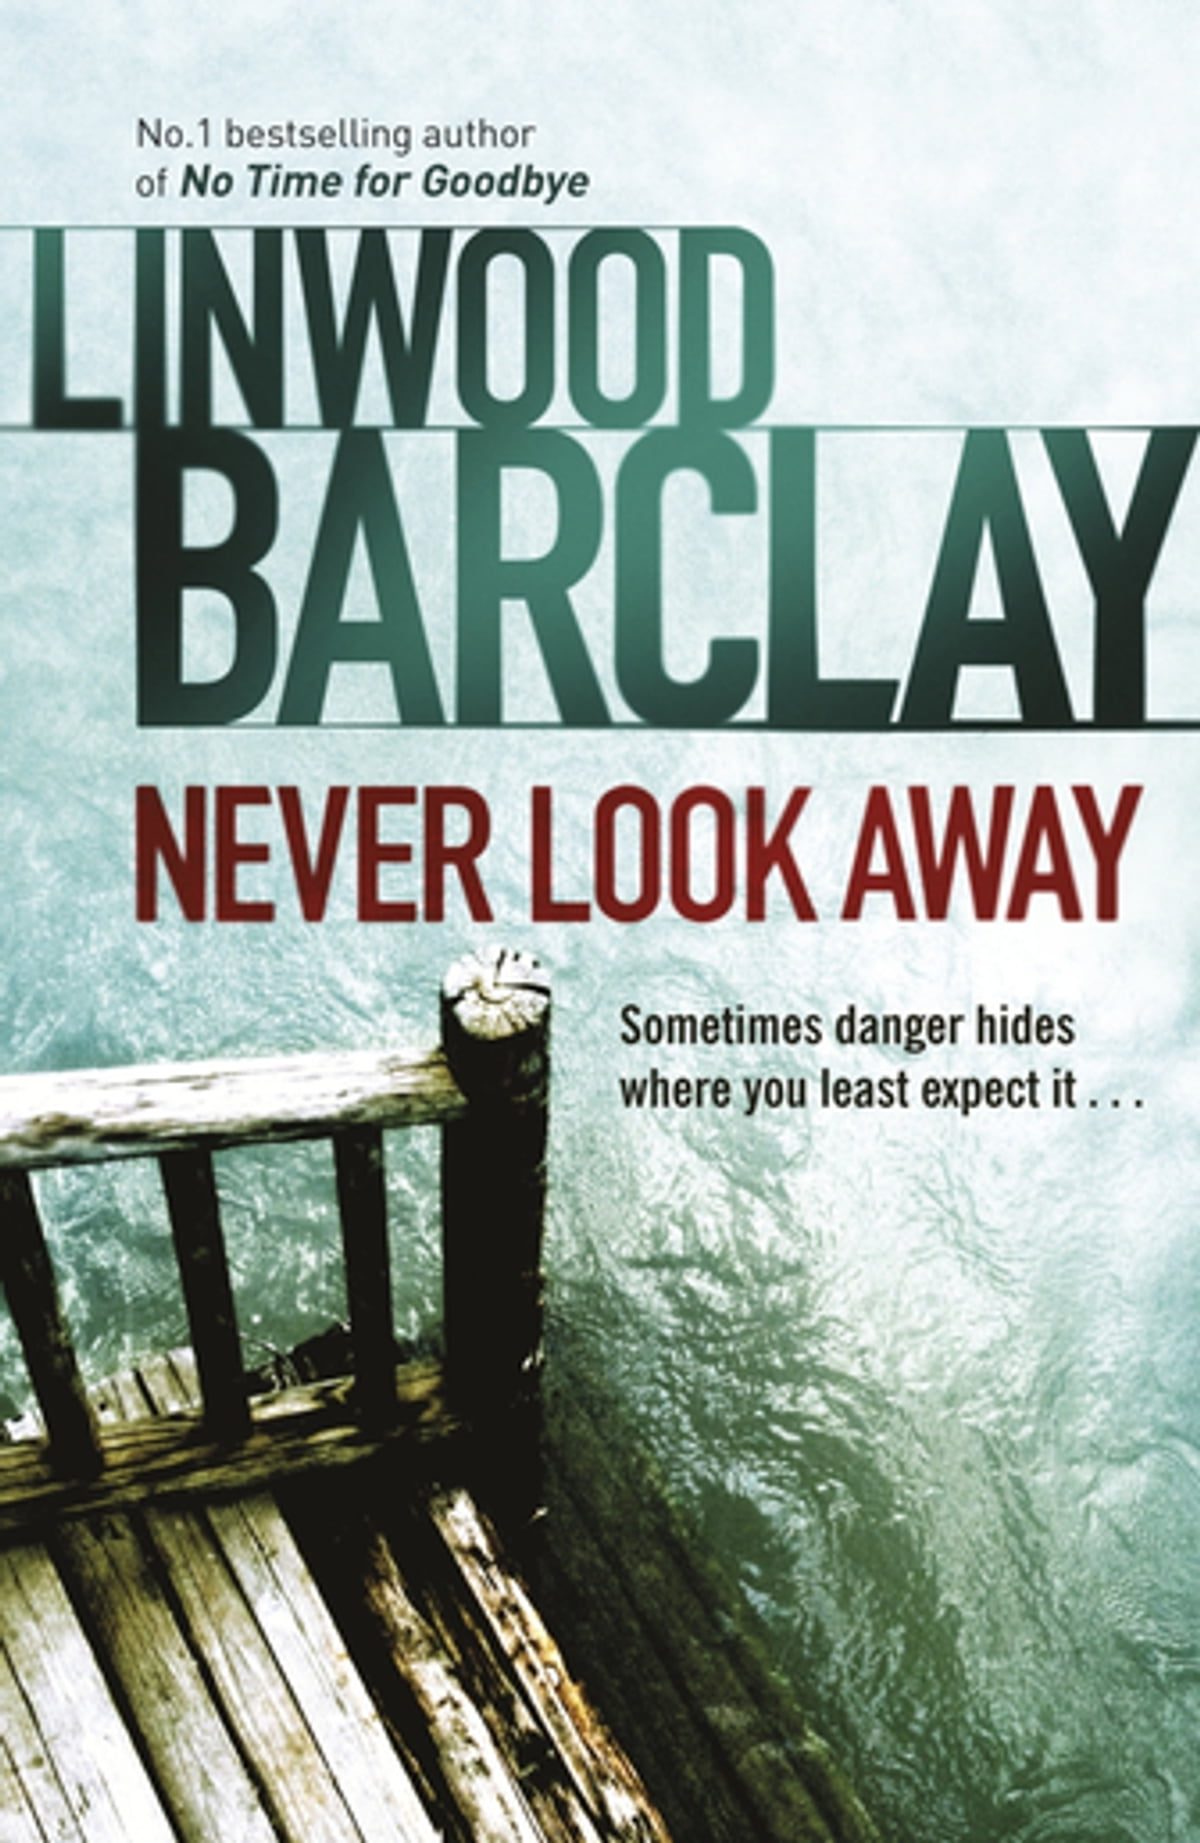 All 30+ Linwood Barclay Books in Order [Ultimate Guide]